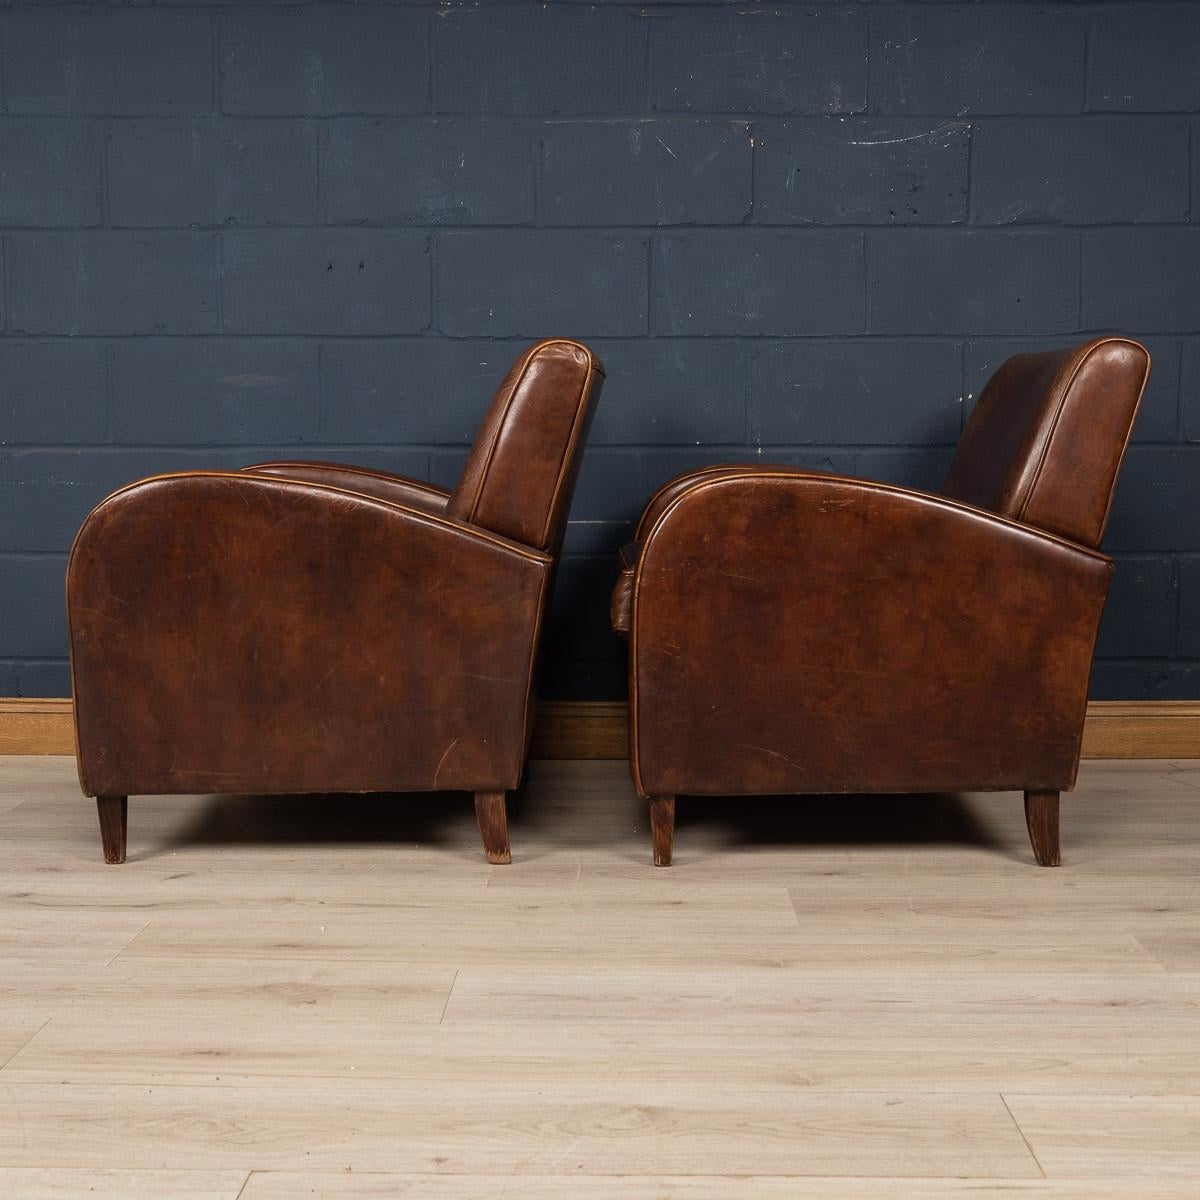 20th Century Sheepskin Leather Club Chairs, Holland In Good Condition For Sale In Royal Tunbridge Wells, Kent